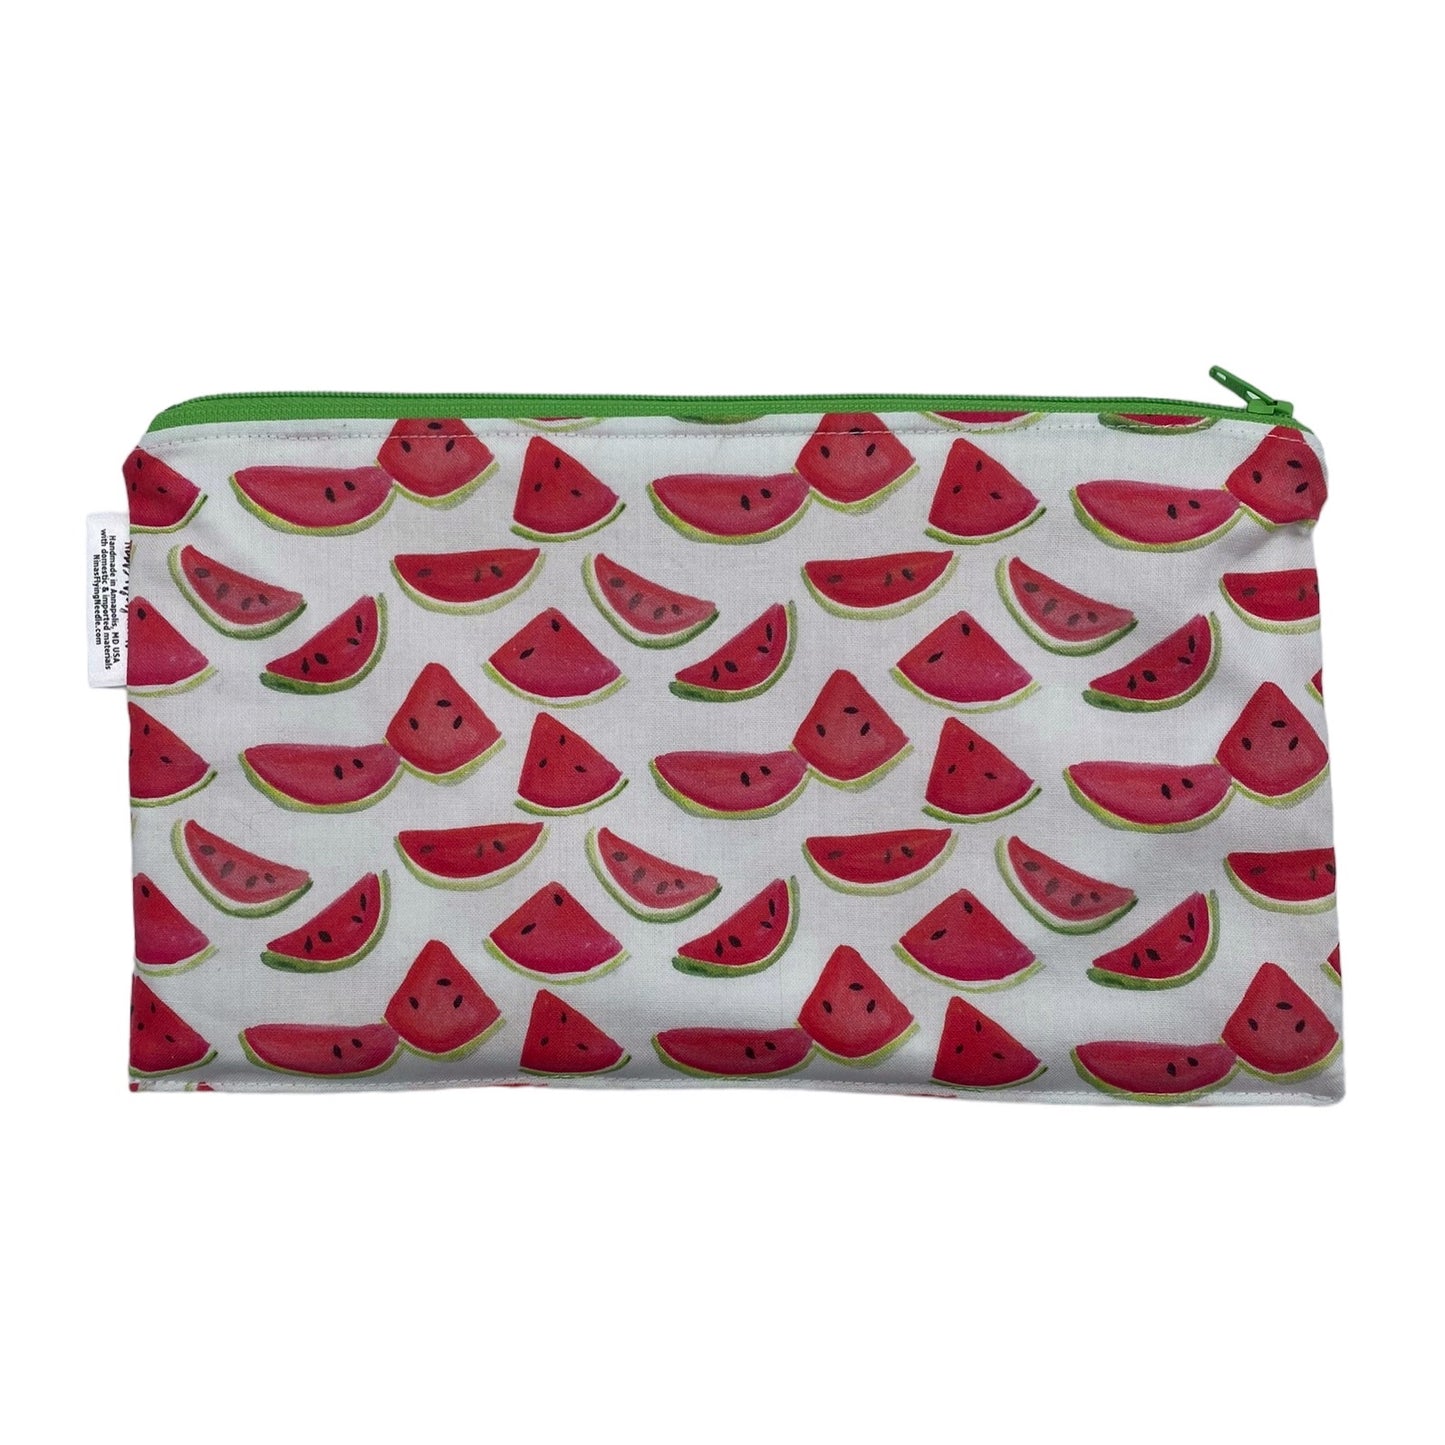 Travel Sized Wet Bag Watermelon Slices